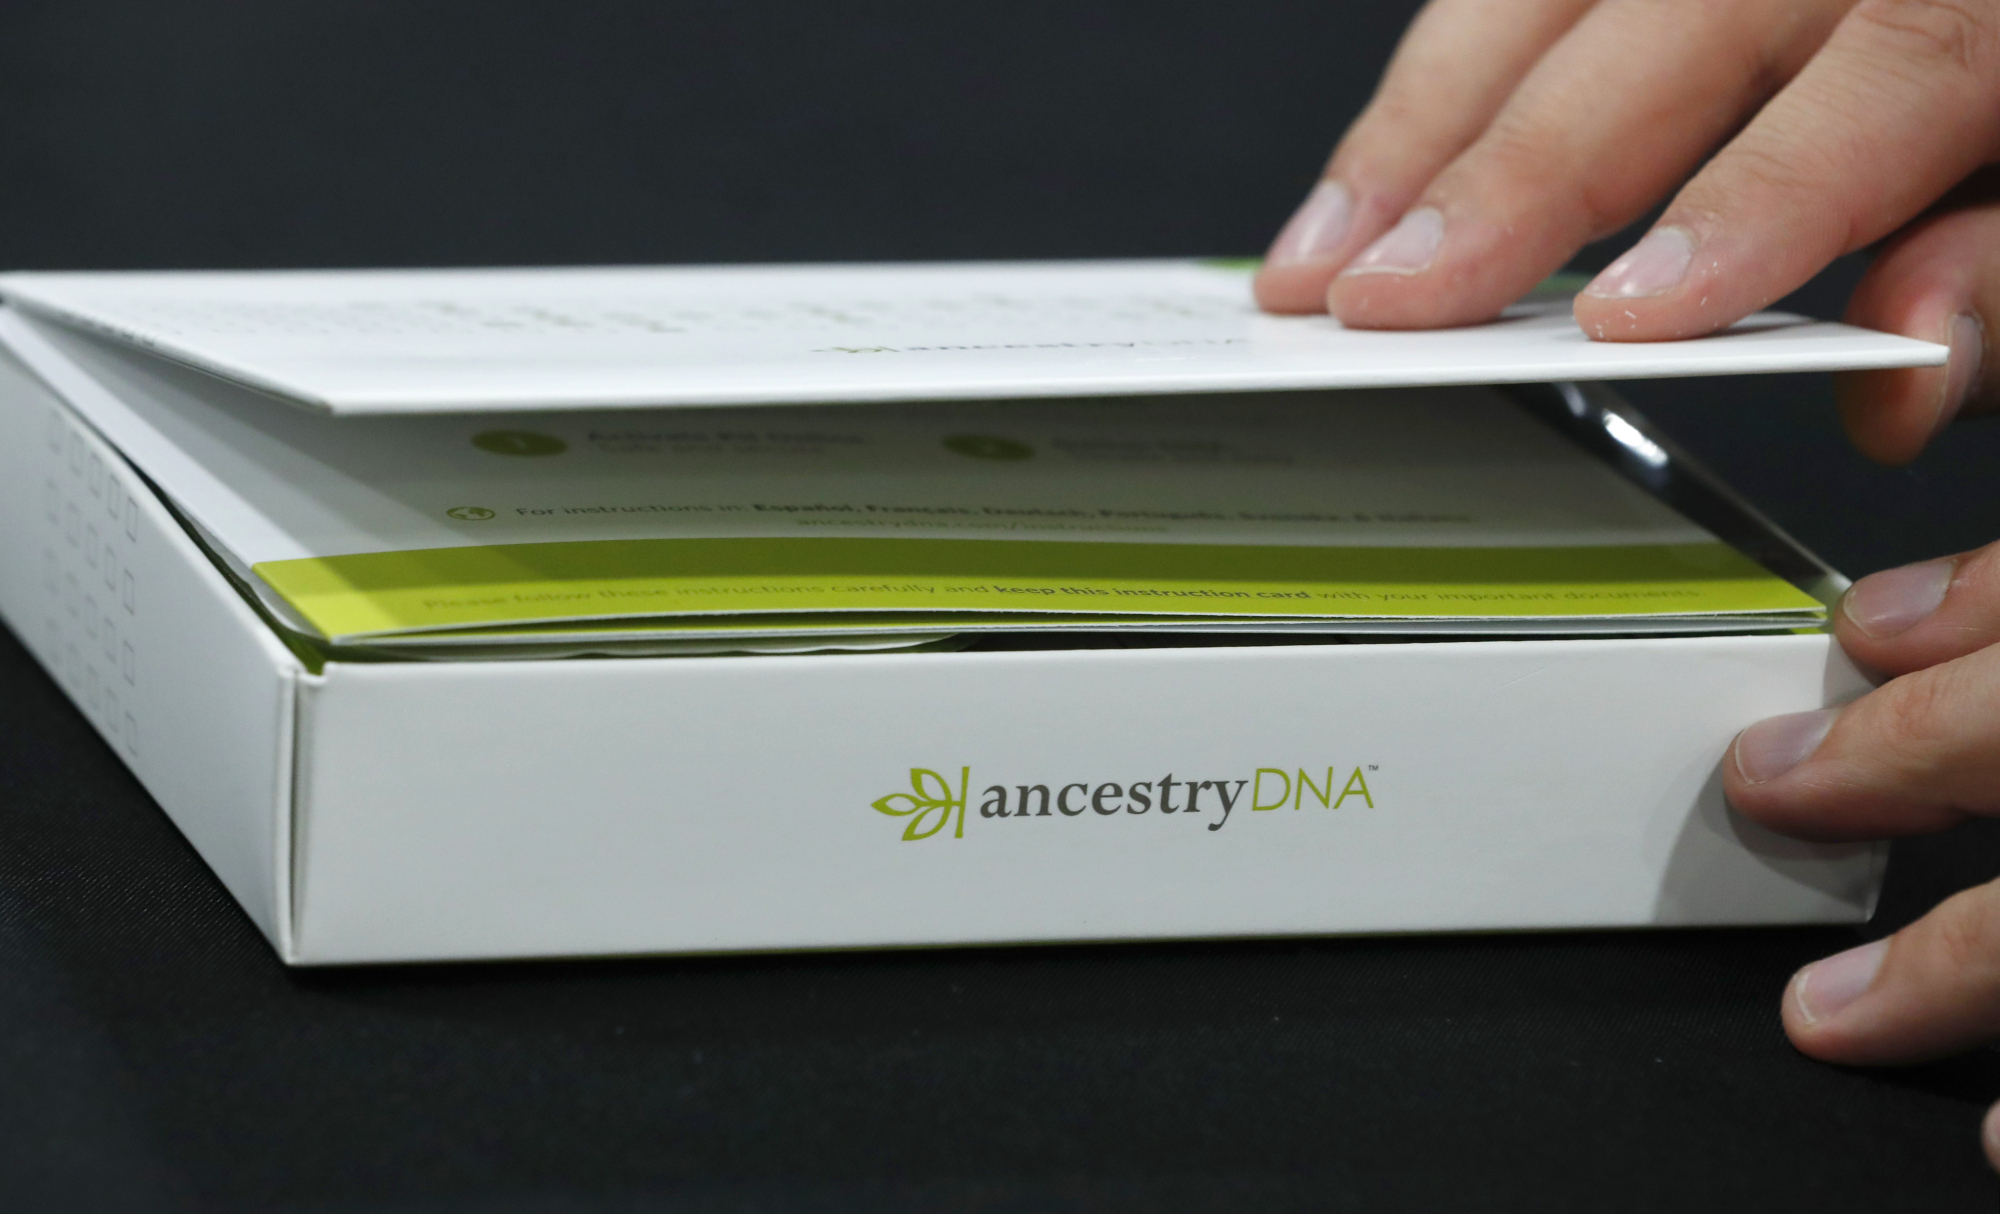 An attendee views an Ancestry&nbsp;DNA kit at the 2017 RootsTech Conference in Salt Lake City, Utah, U.S., on Thursday, Feb. 9, 2017. The four-day conference is a genealogy event focused on discovering and sharing family connections across generations through technology.